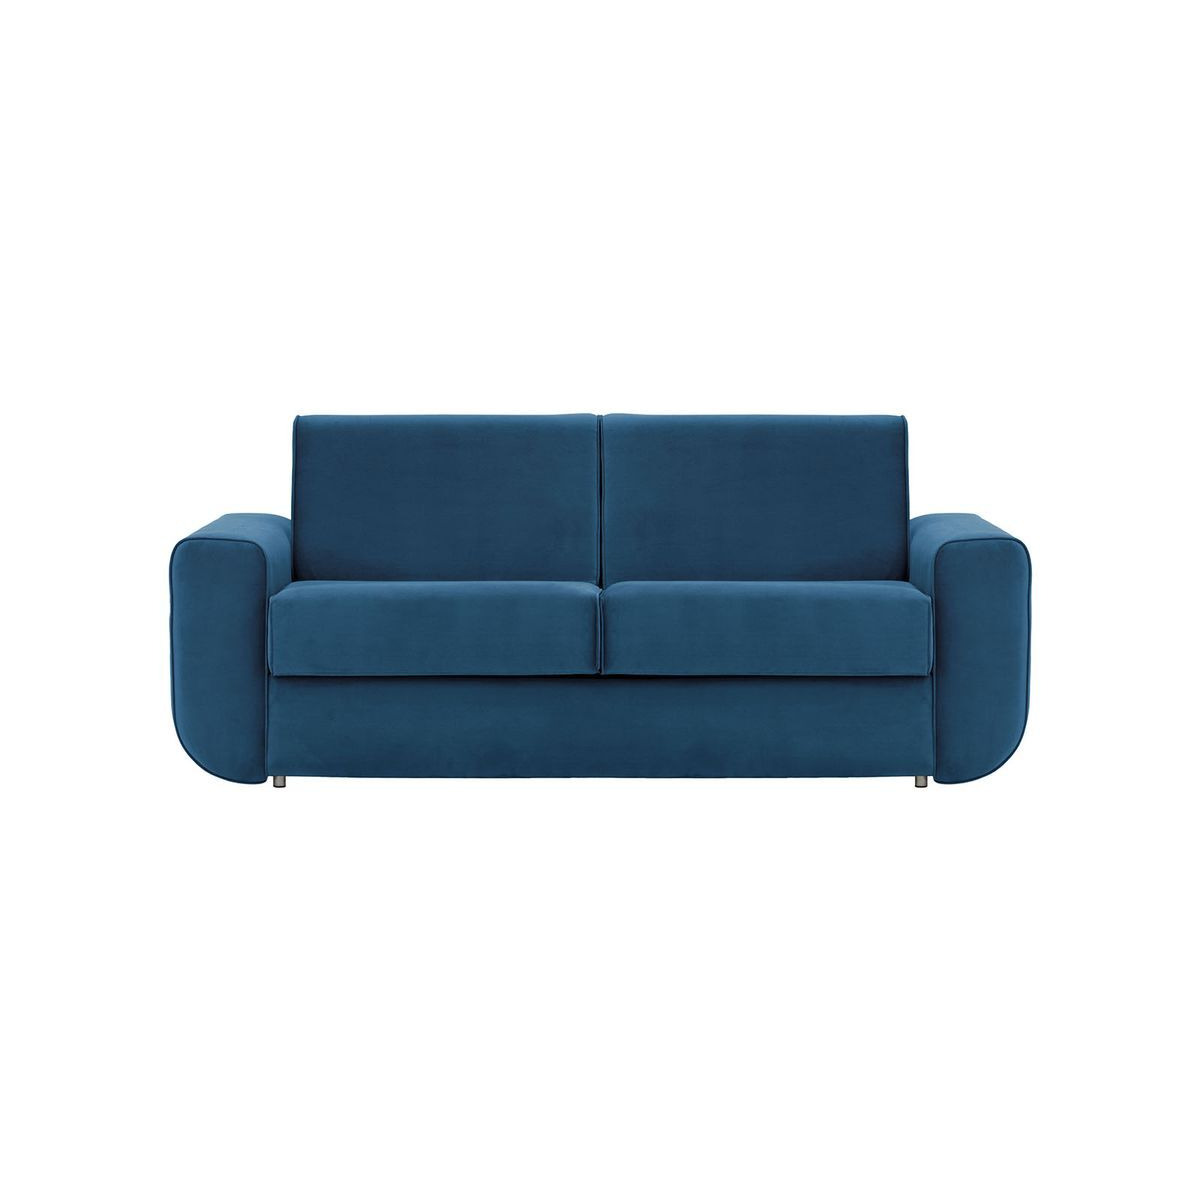 Salsa 3 seater Sofa Bed, blue - image 1